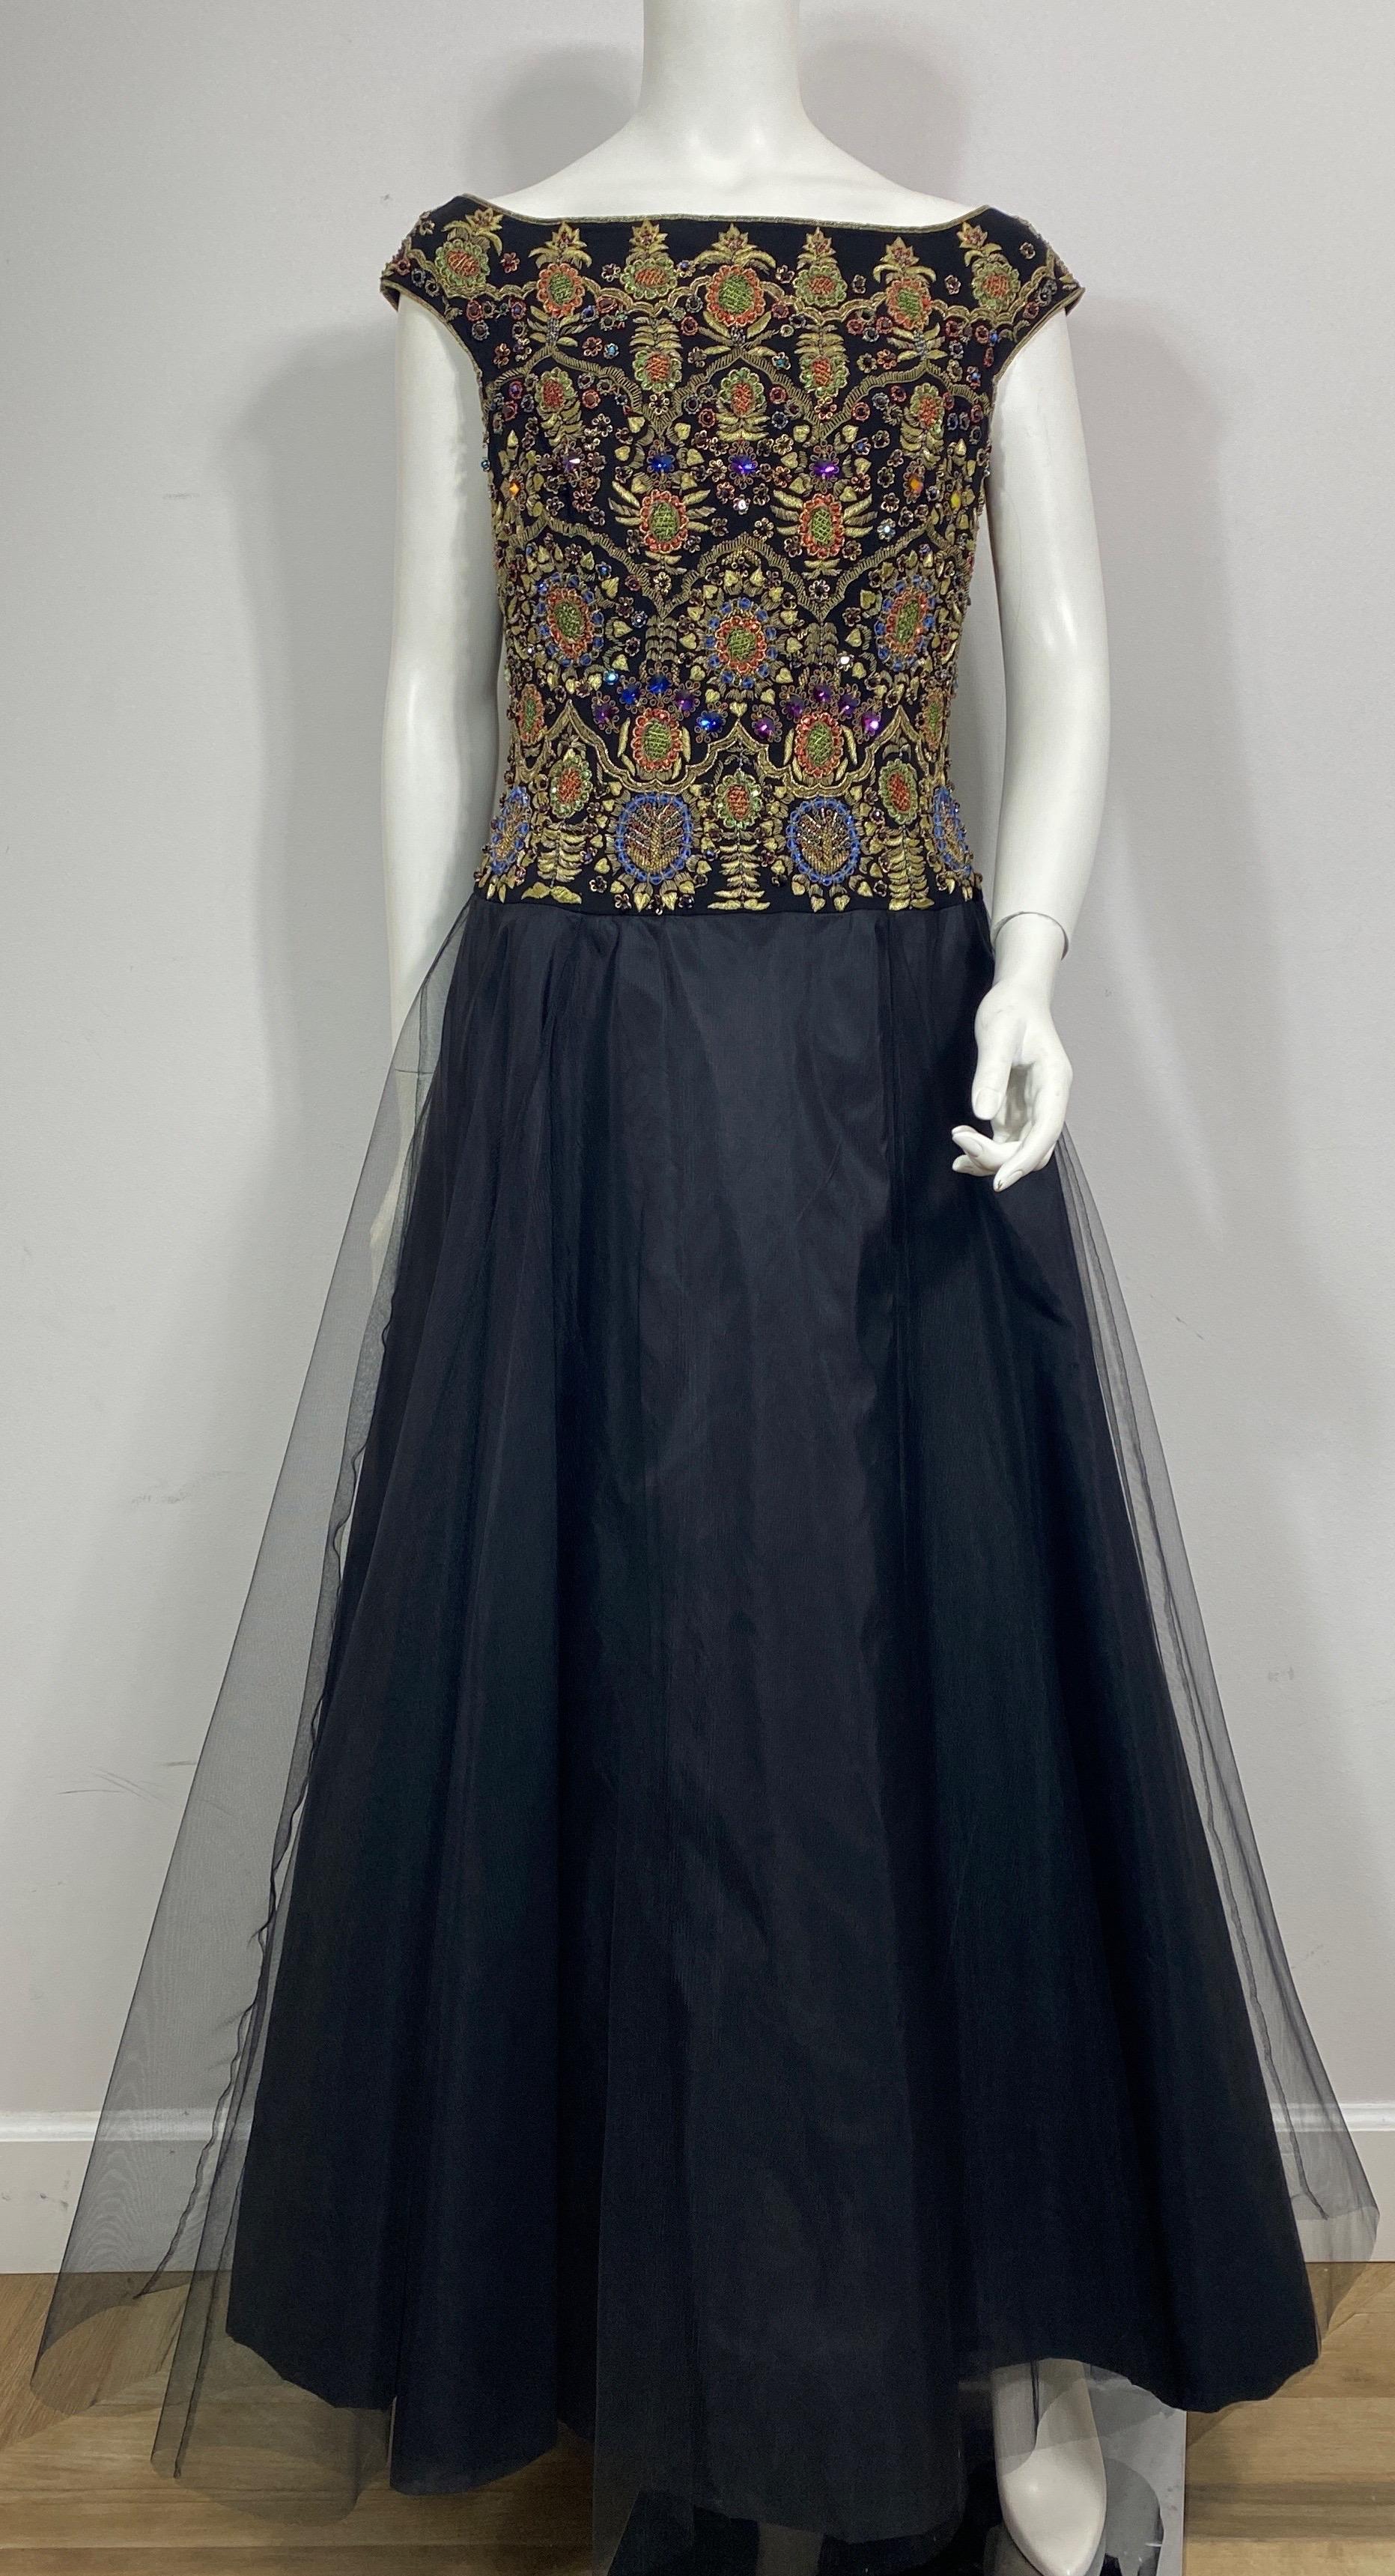 Escada 1990’s Black Silk and Tulle Gown w/ Heavily Beaded Bodice - Size 38 In Excellent Condition For Sale In West Palm Beach, FL